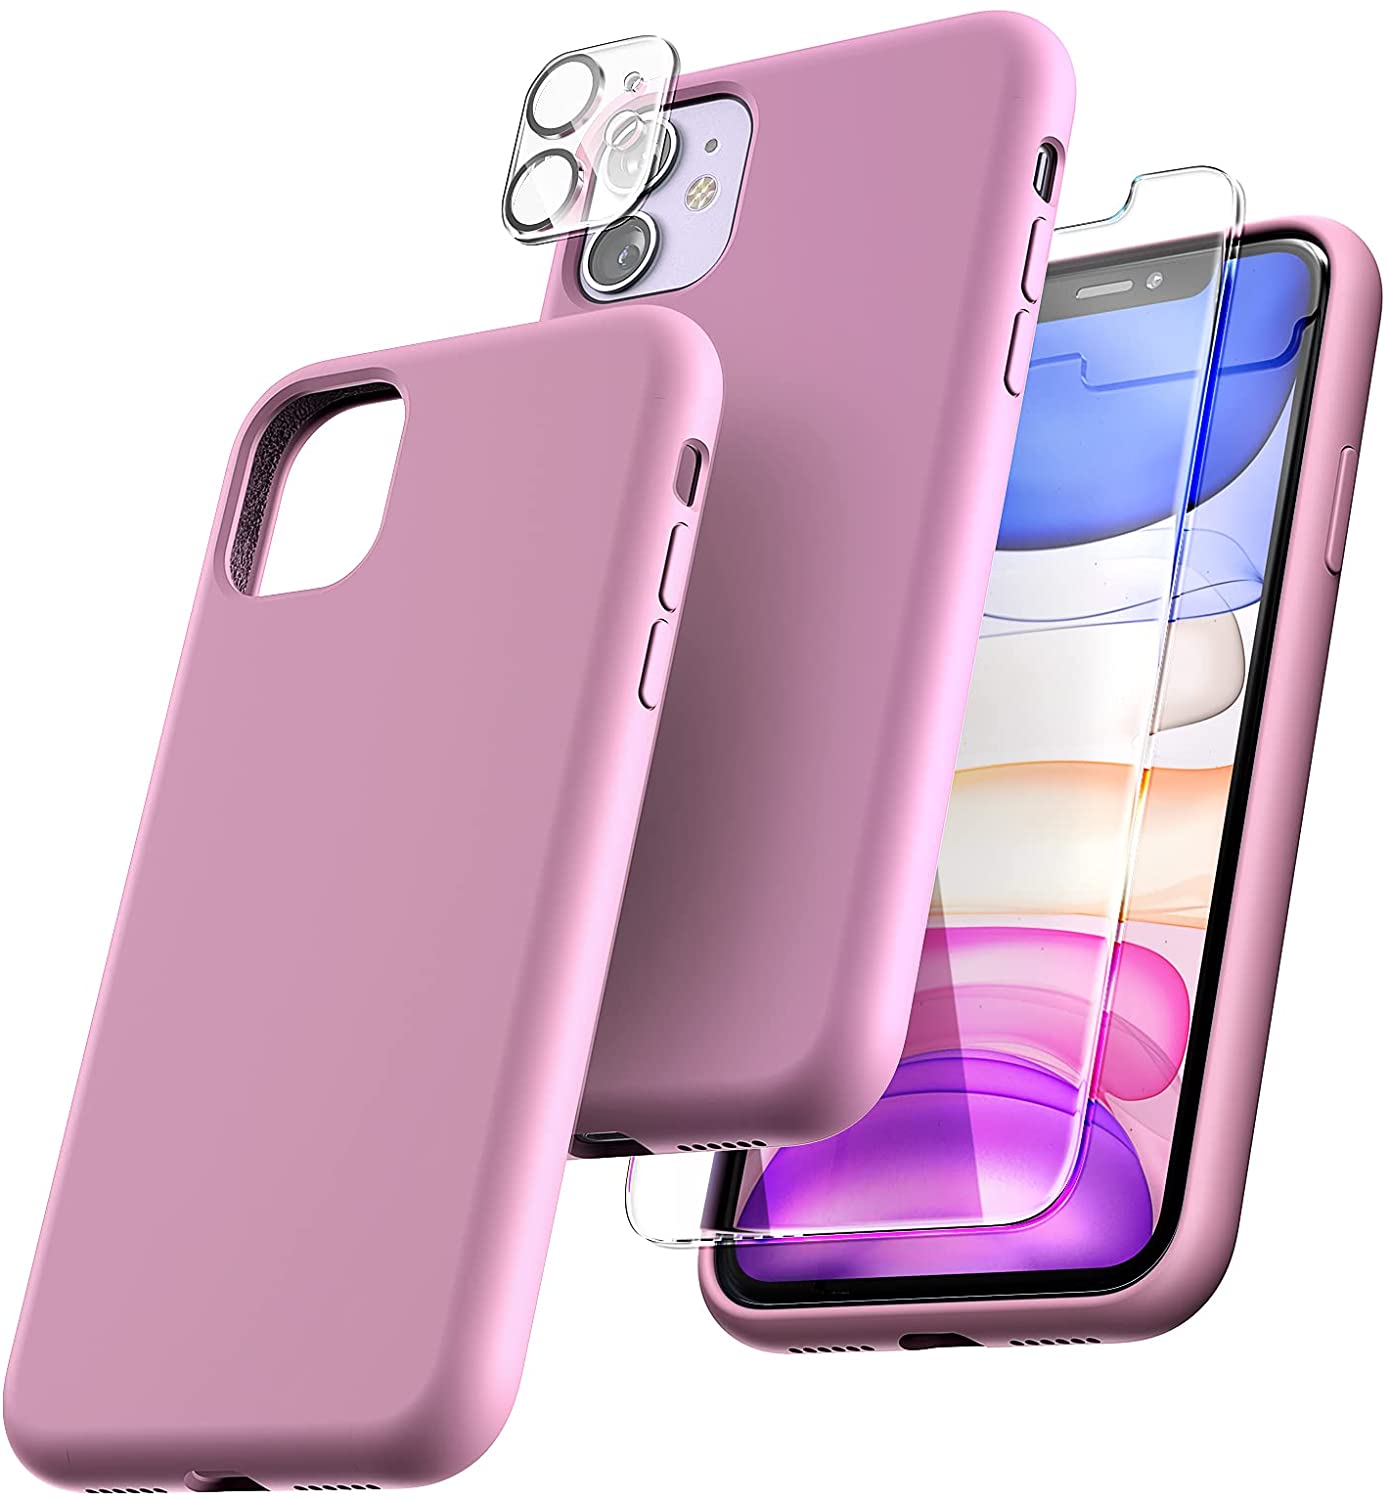 TOCOL [5 in 1] Designed for iPhone 11 Case, with 2 Pack Screen Protector + 2 Pack Camera Lens Protector, Liquid Silicone Slim Shockproof Cover [Anti-Scratch] [Drop Protection], Lilac Purple